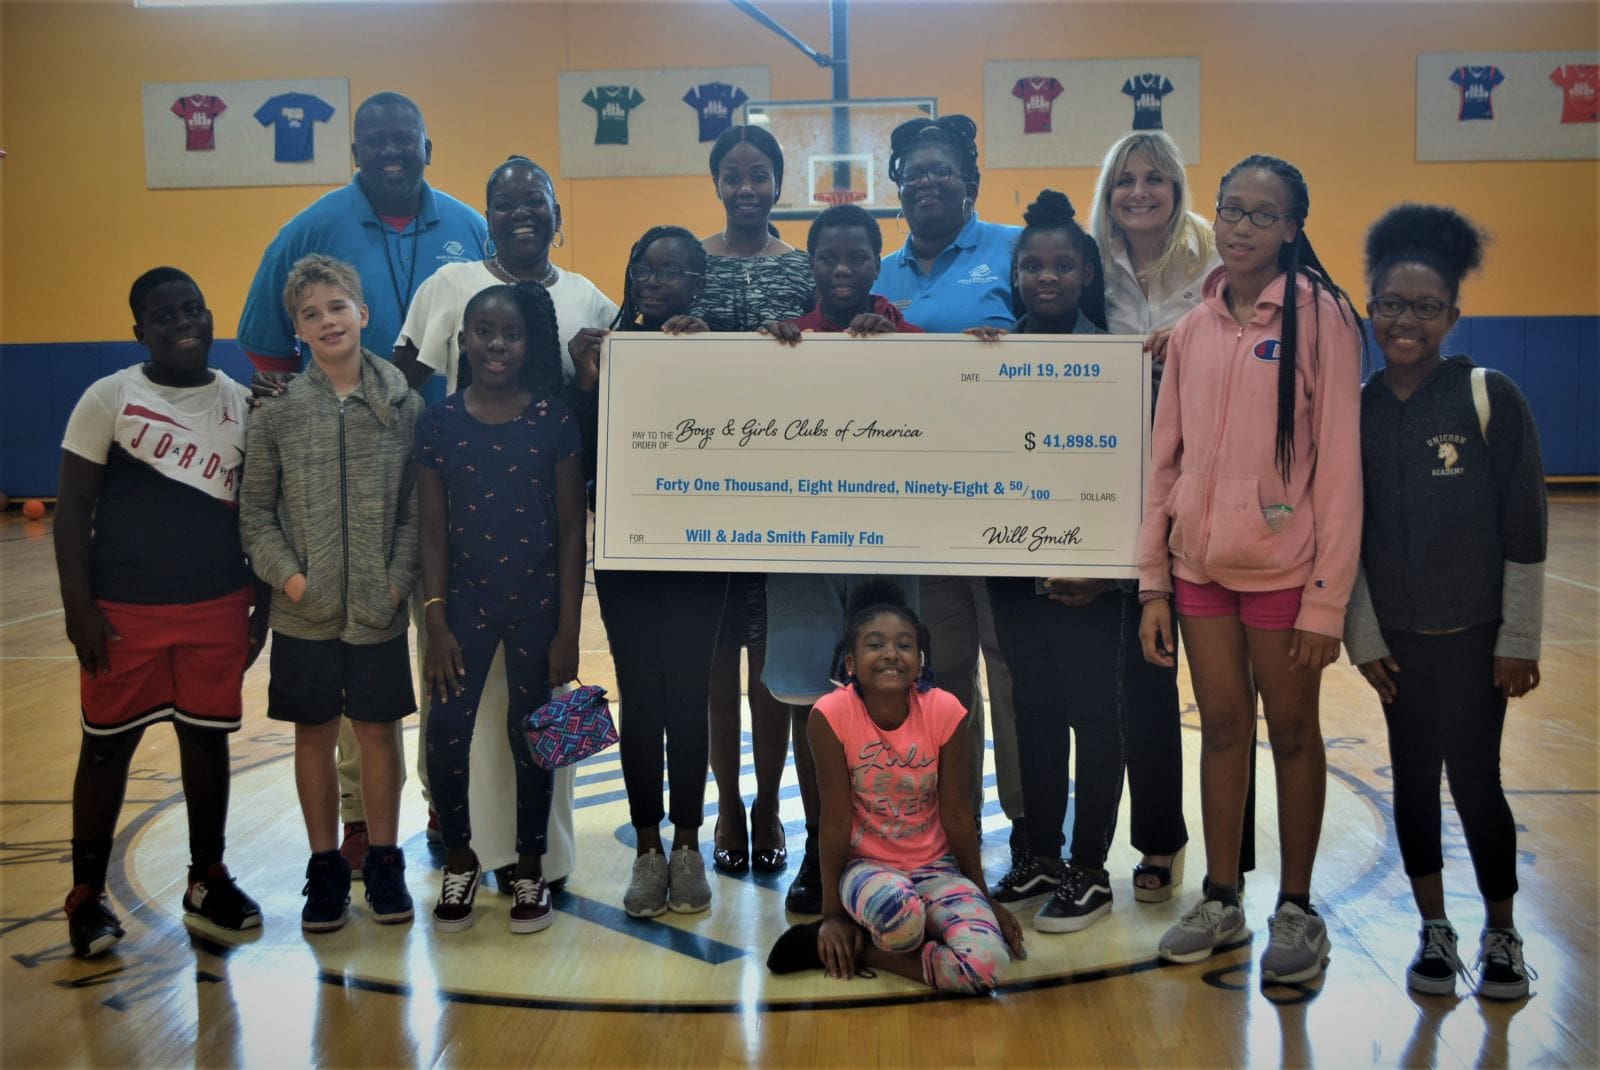 Official photo with check-Ellen Smith visit BGCPBC